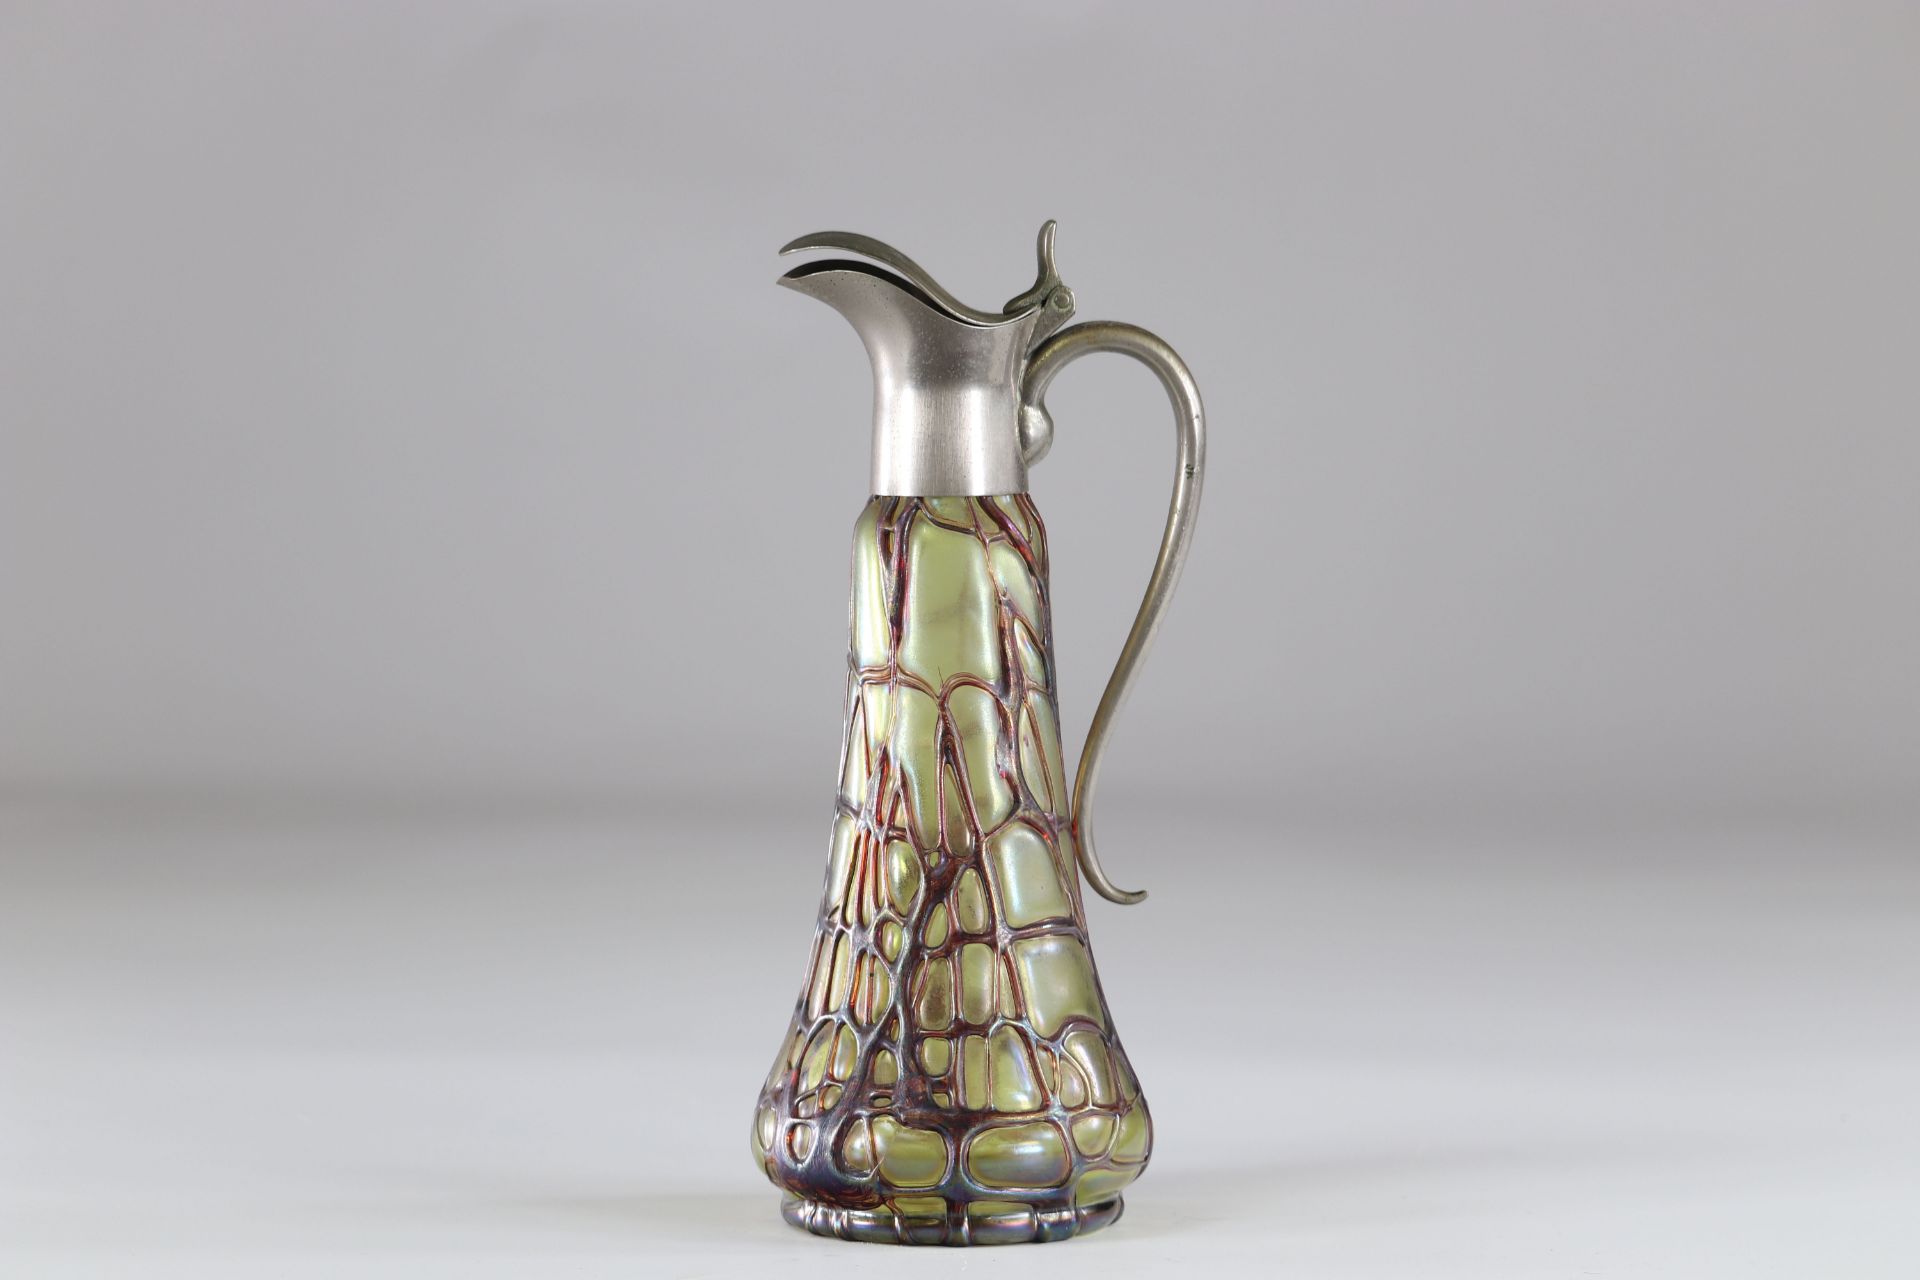 Decanter in the style of Loetz